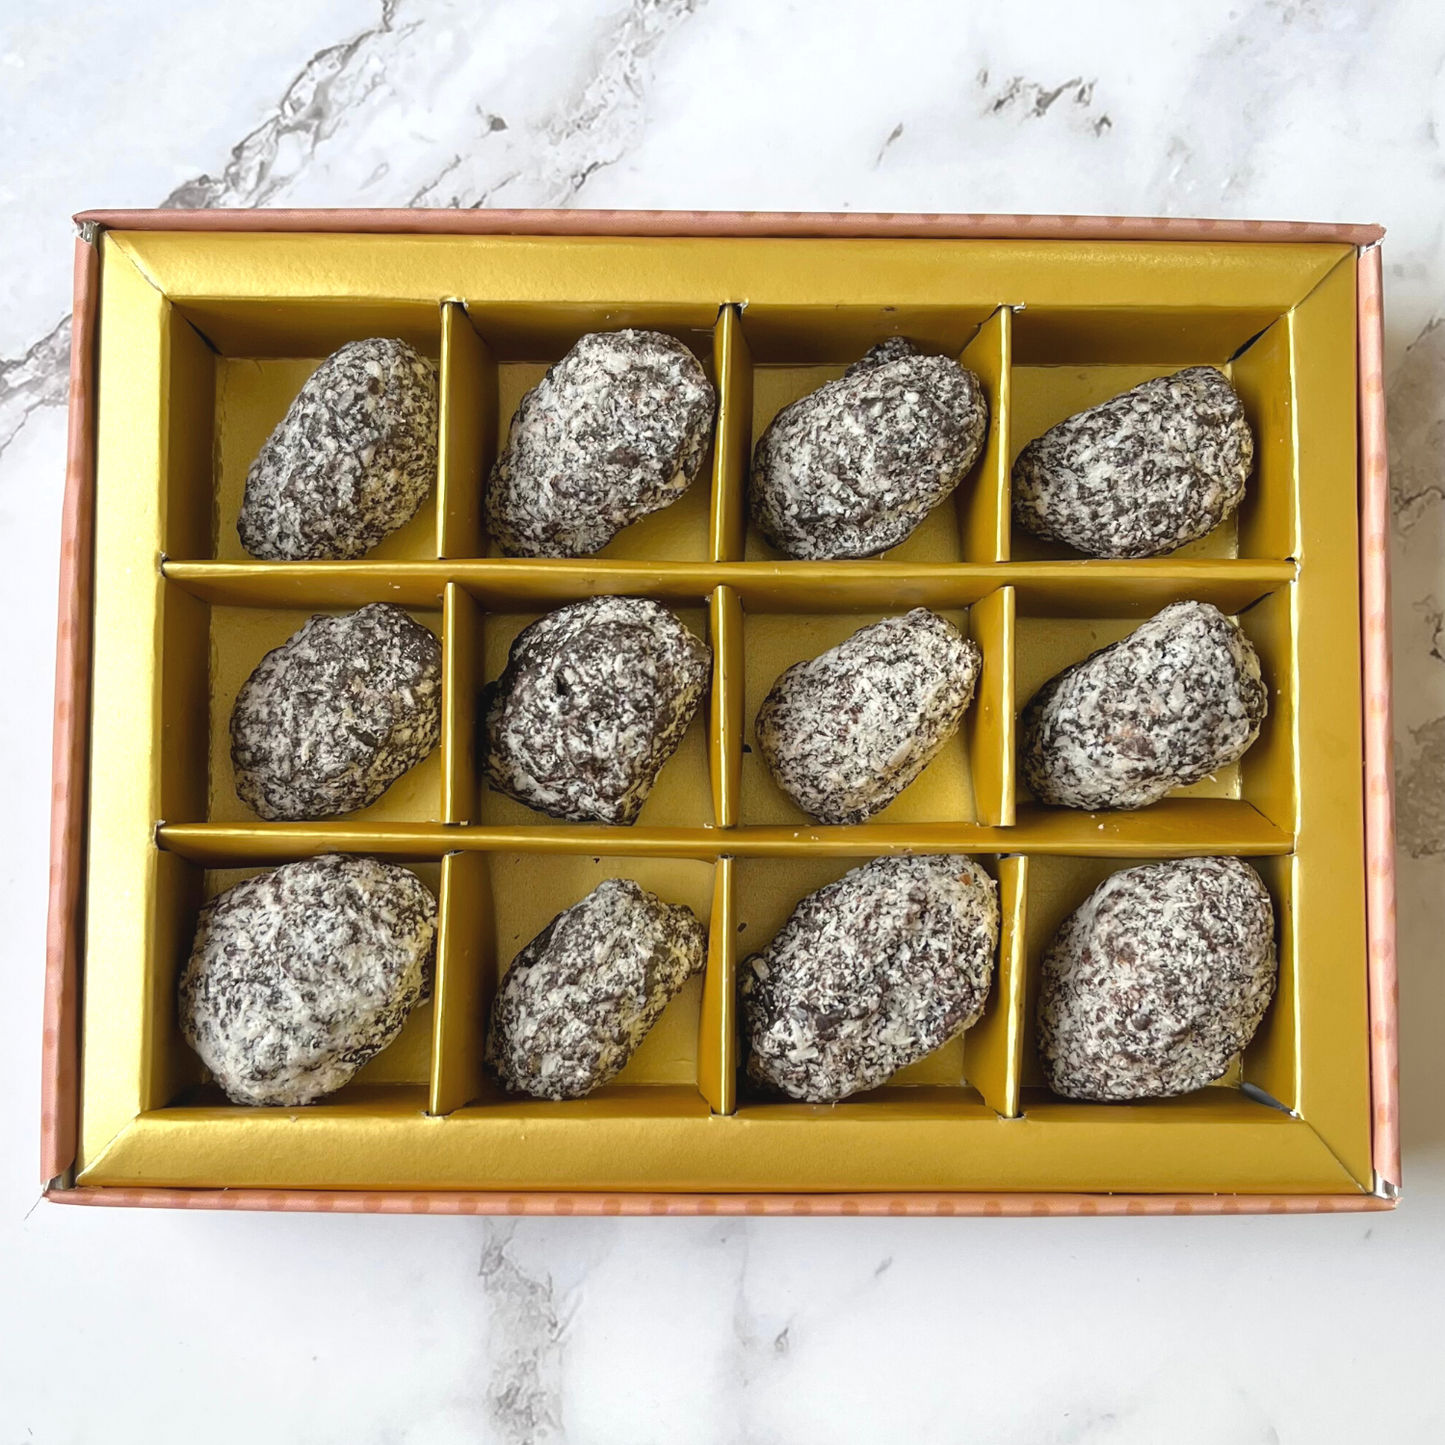 Dark Chocolate Coated Seedless Dates - Almonds Stuffing and Coconut Shreds Coating- 12 pieces